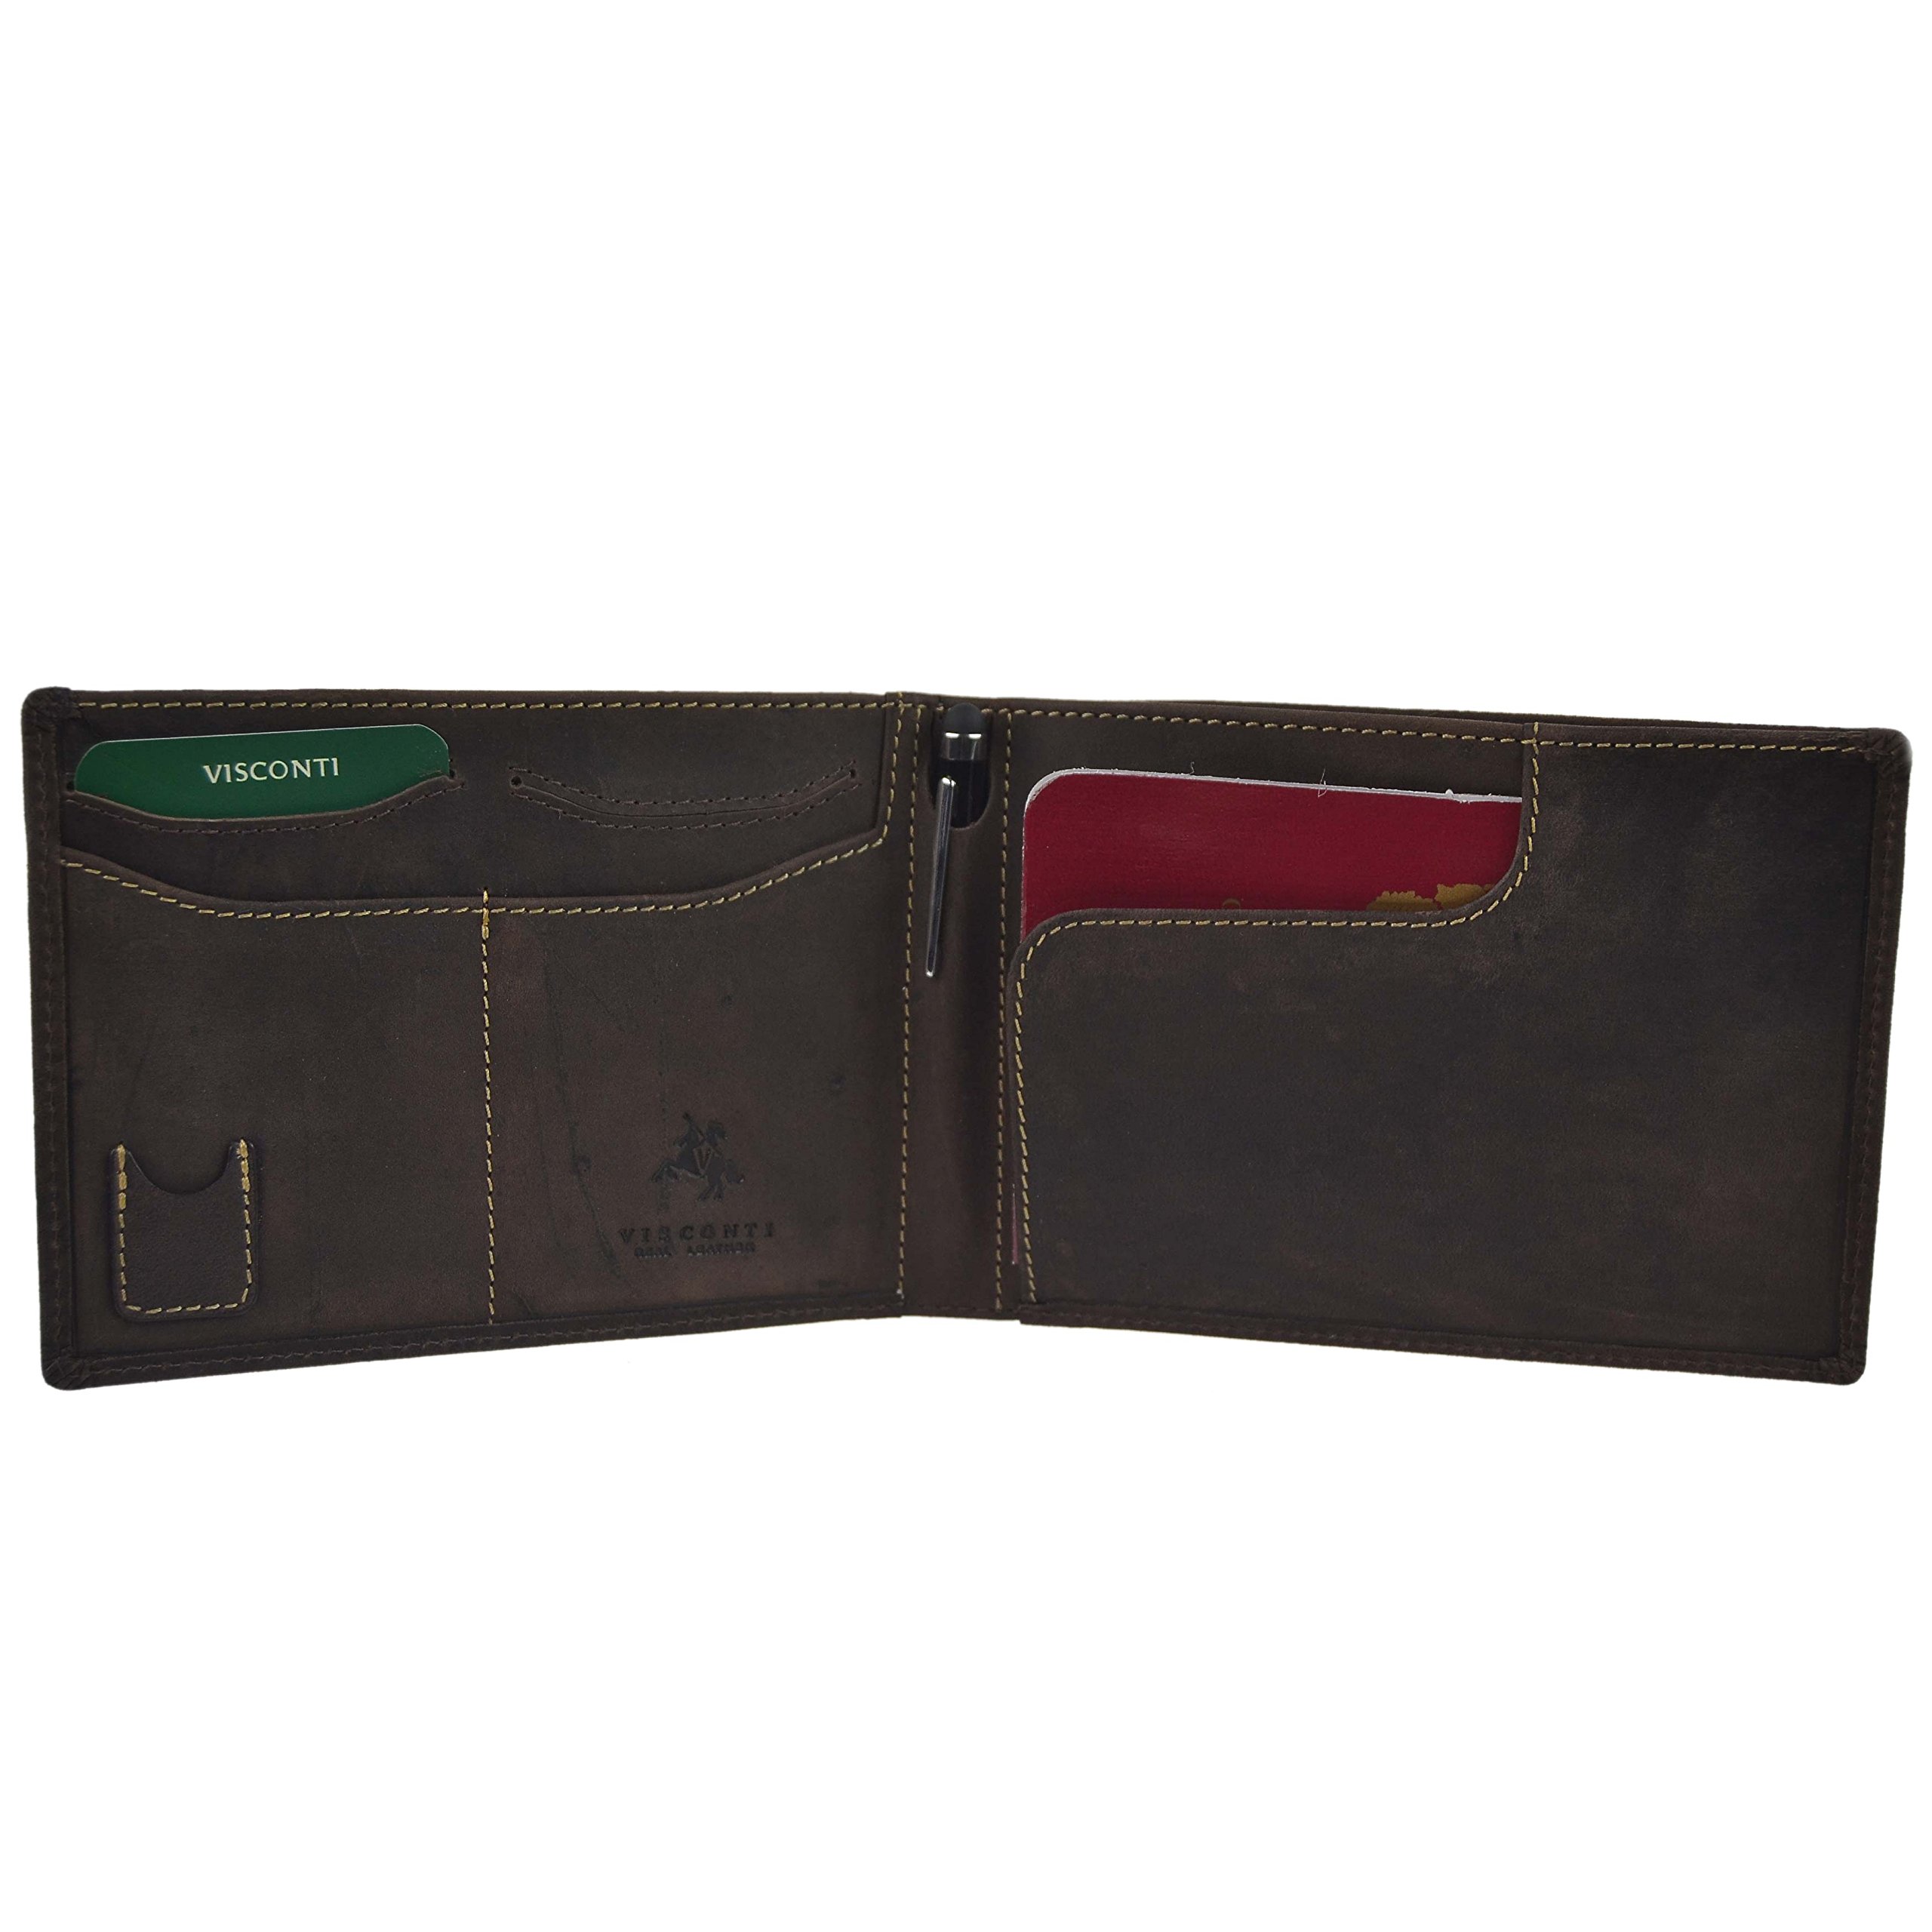 Visconti Men's Oil Leather Travel Wallet Onesize Brown